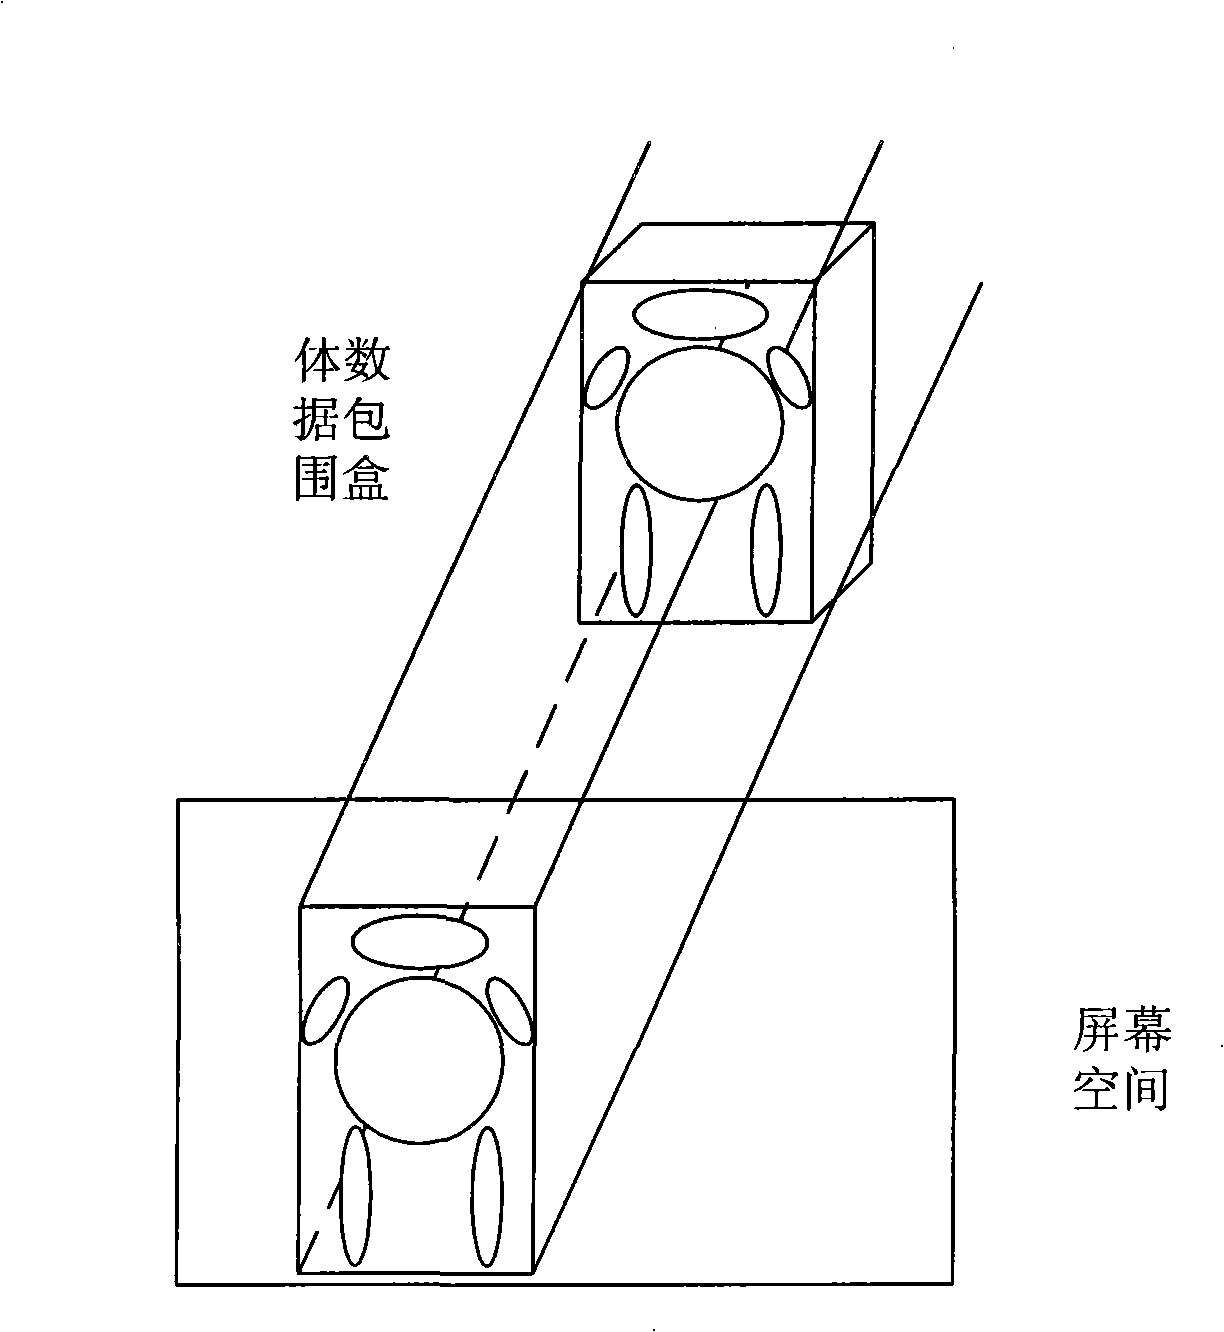 Parallel processing method drawn by pre-projection light ray projection body